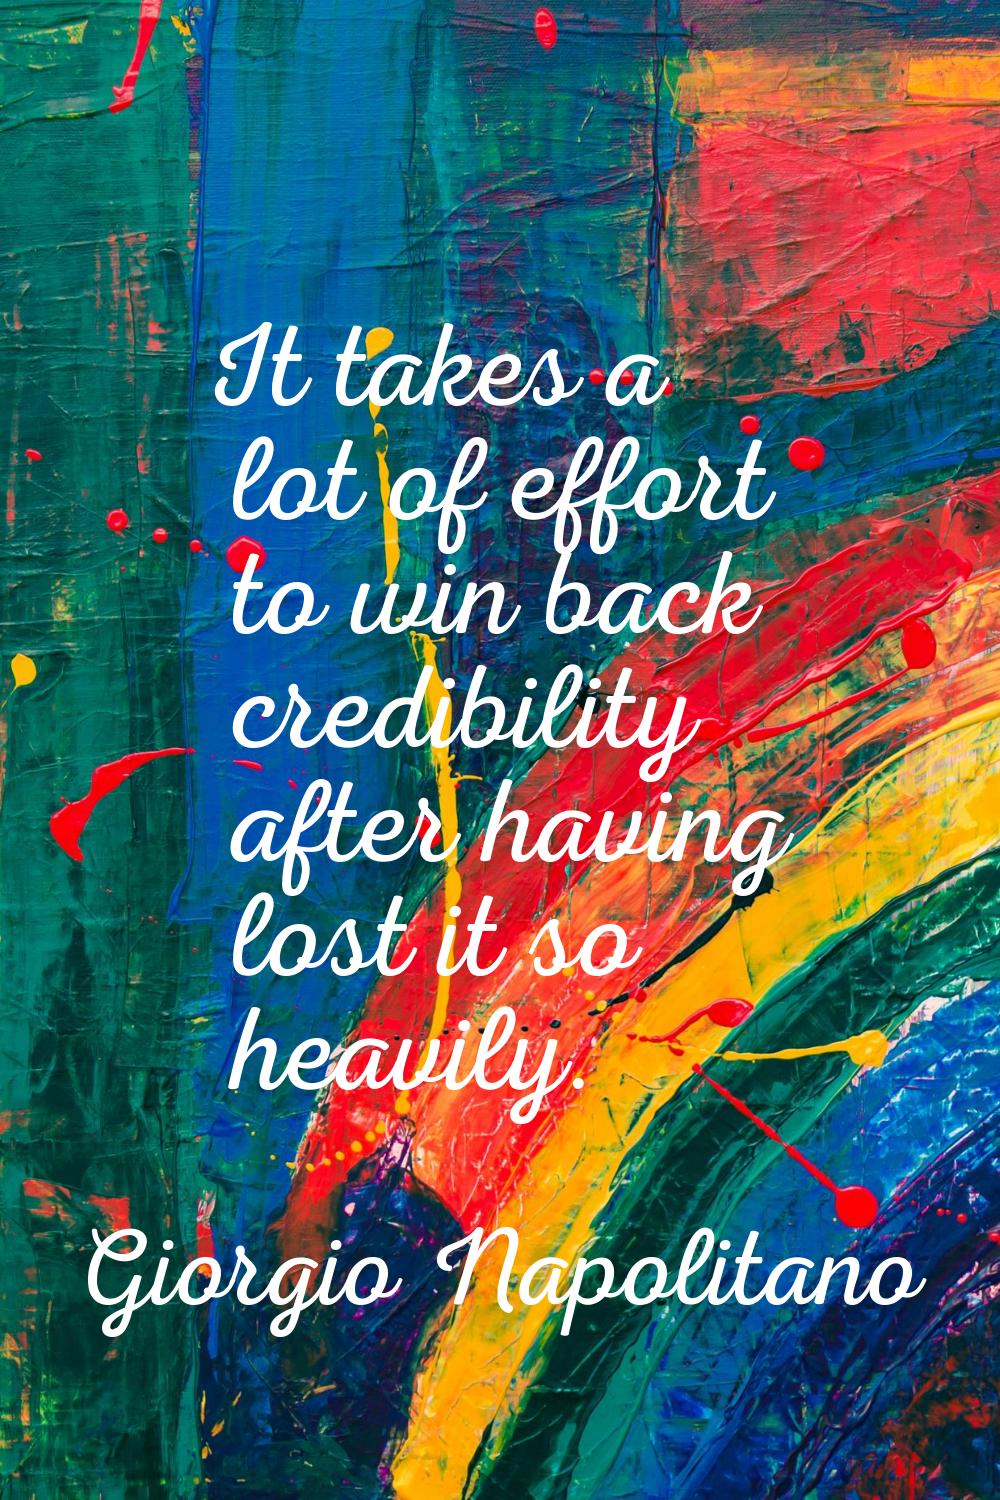 It takes a lot of effort to win back credibility after having lost it so heavily.